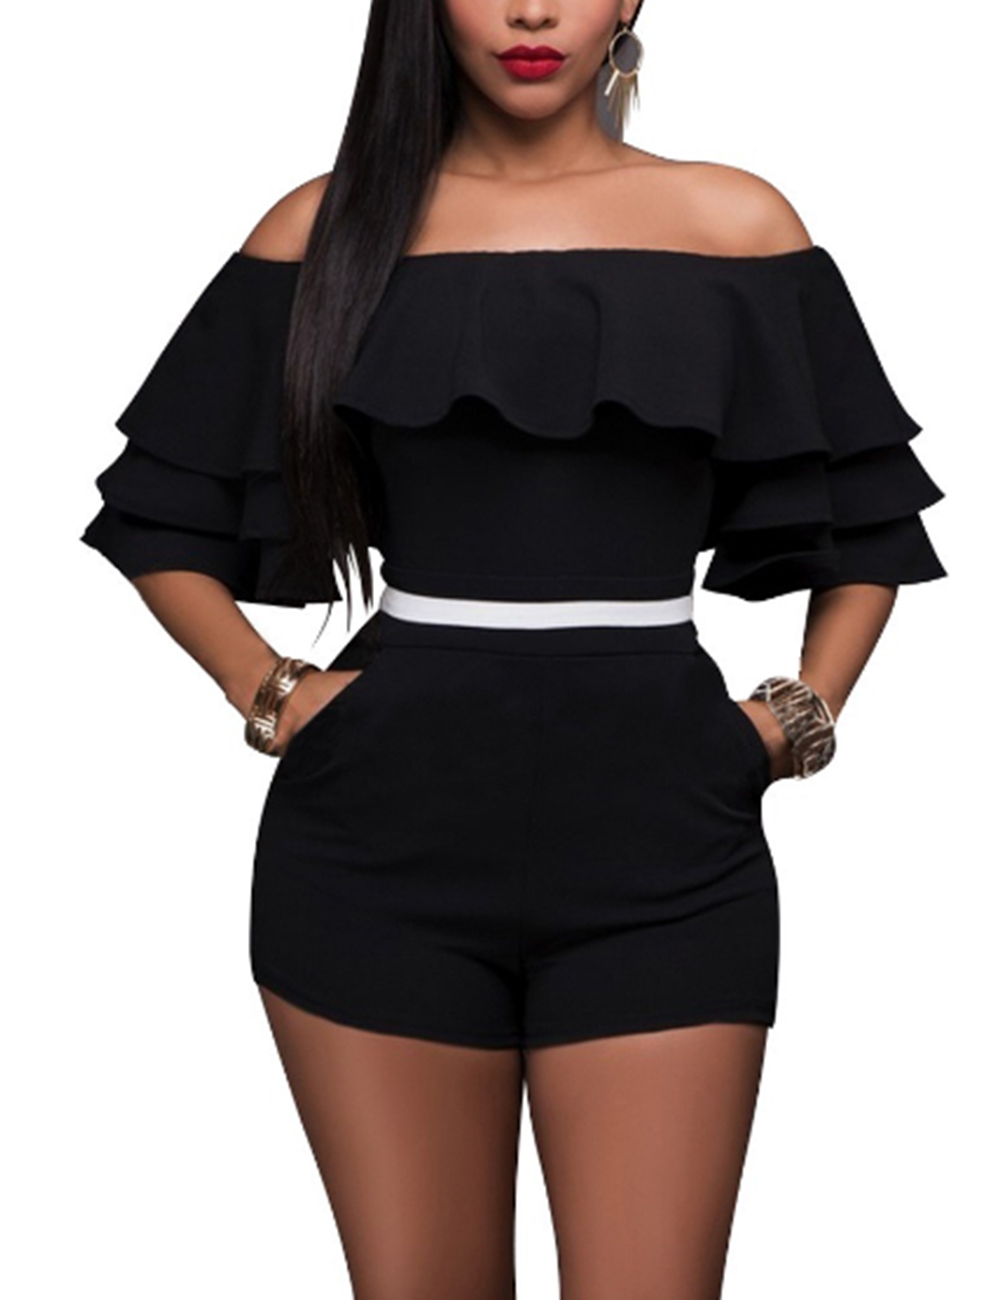 Women Fashion Sexy Slim Off Shoulder Tops Ruffle Solid Color One-piece Short Siamese Pants